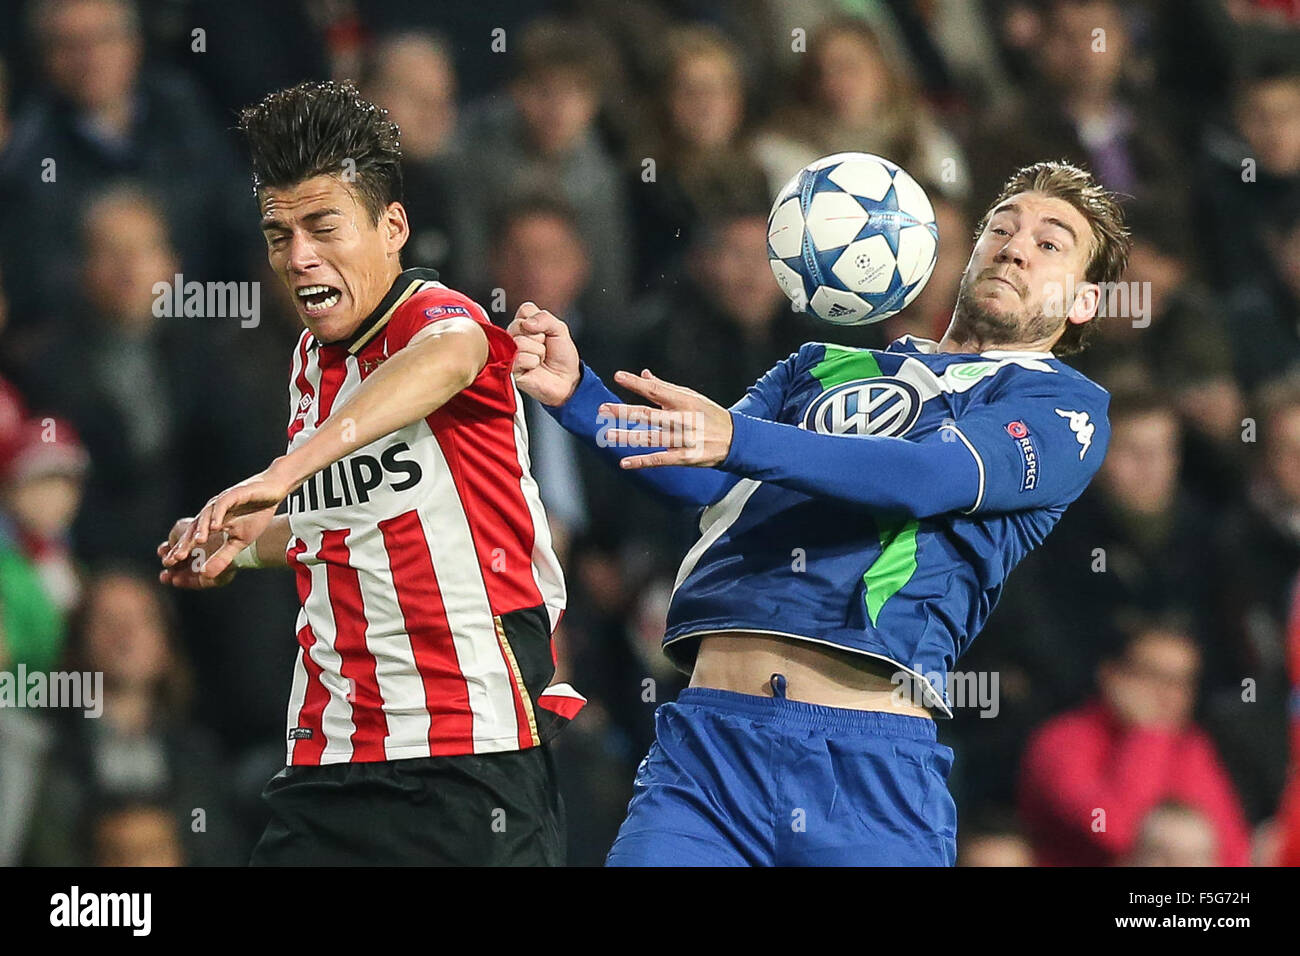 Eindhoven, The Netherlands. 03rd Nov, 2015. Nicklas Bendtner of Wolfsburg (r) and Hector Moreno, of Eindhoven vie for the ball during the UEFA Champions League Group B soccer match PSV Eindhoven and VfL Wolfsburg at the PSV Stadium in Eindhoven, The Netherlands, 03 November 2015. Photo: Maja Hitij/dpa/Alamy Live News Stock Photo